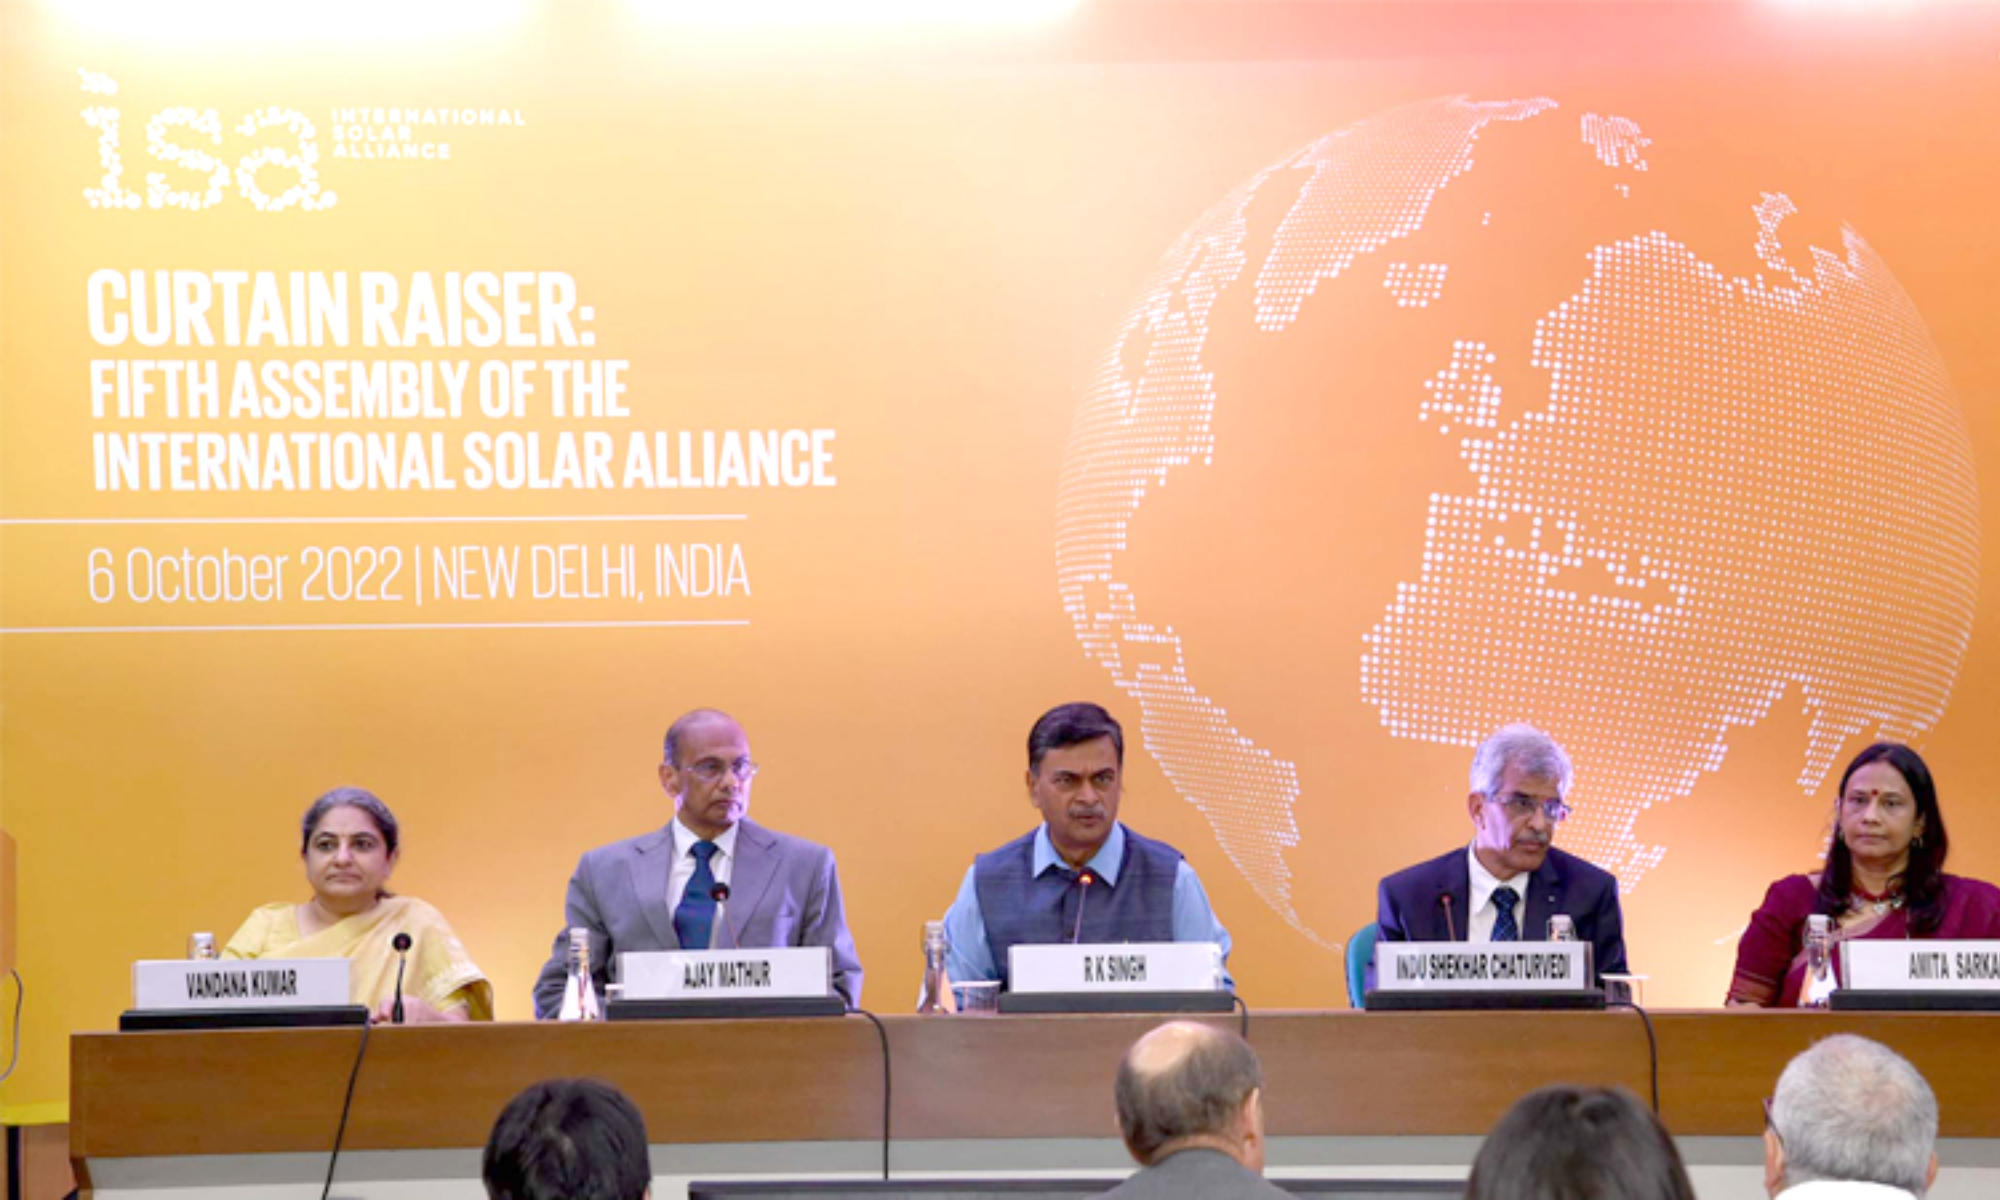 5th Assembly of International Solar Alliance to be held in New Delhi